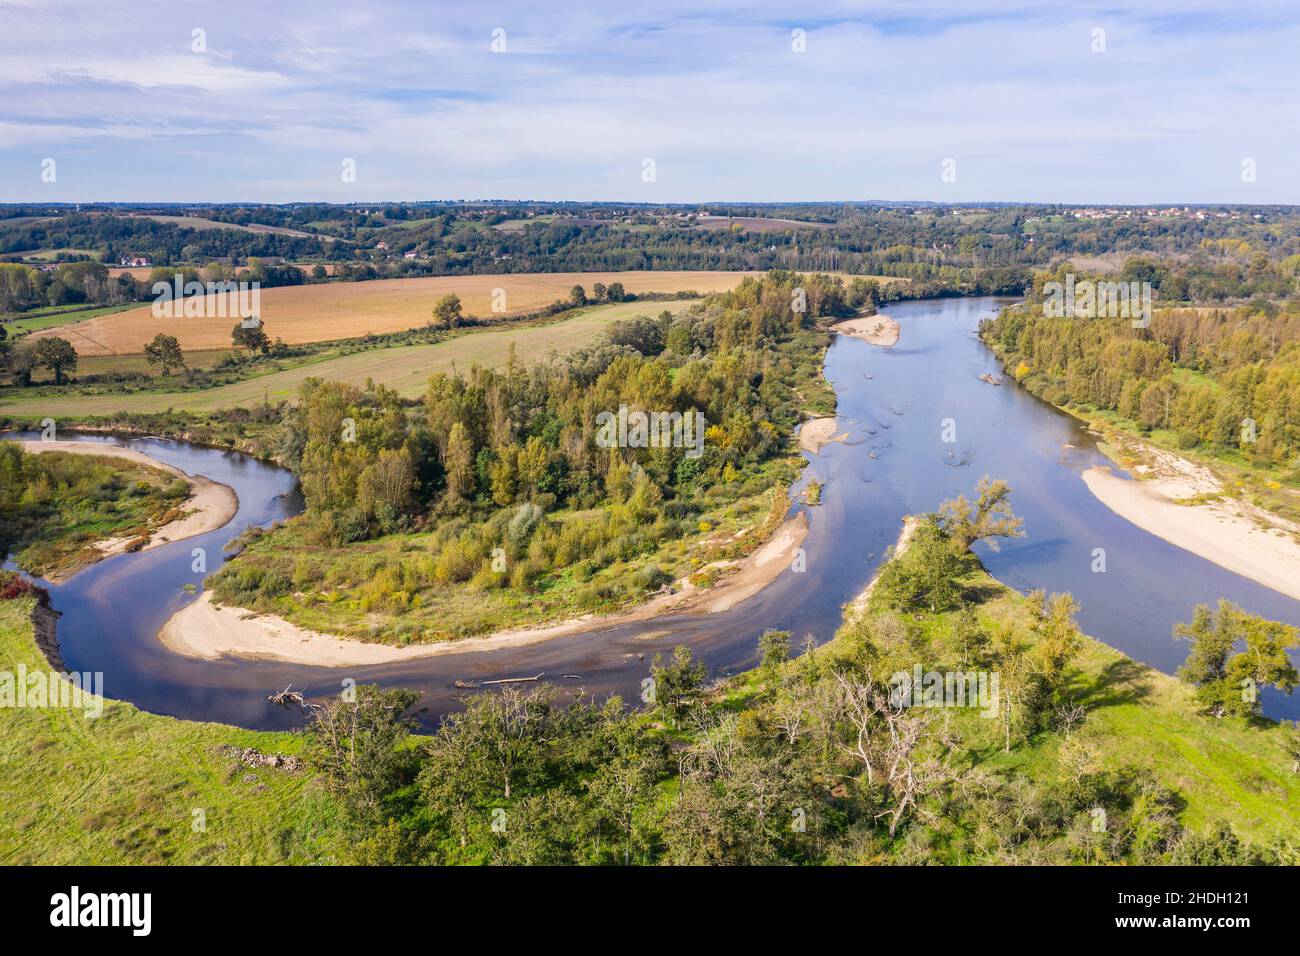 France, Allier, Bourbonnais, La Ferte-Hauterive, confluence of the Sioule river with the Allier river, protected zone site Natura 2000 Basse Sioule (a Stock Photo